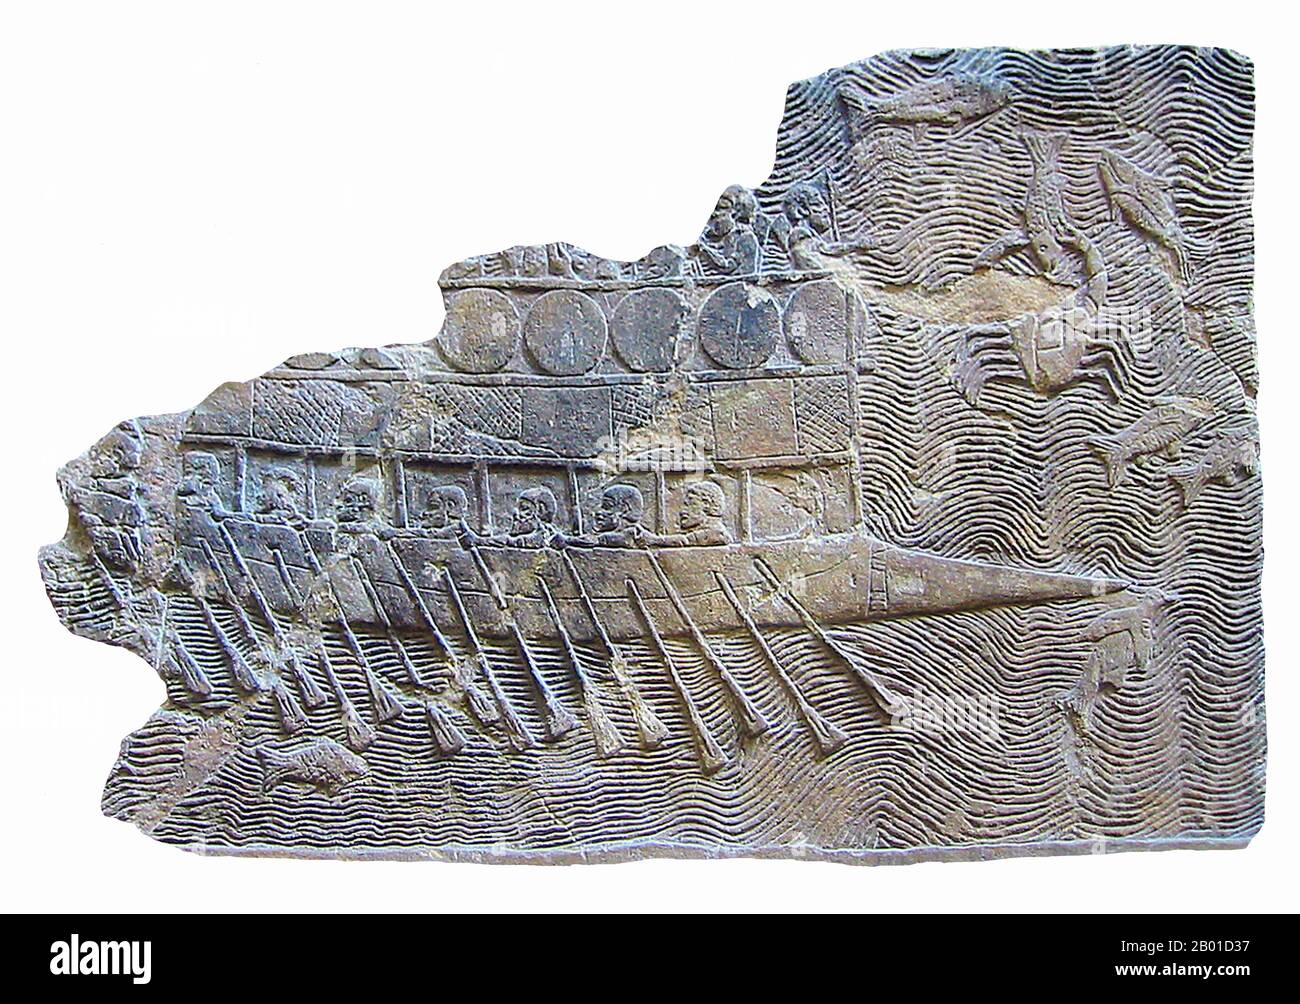 Iraq: Fragment of a bas-relief of an Assyrian warship from the Palace at Nineveh, c. 700 BCE. Photo by World Imaging (CC BY-SA 3.0 License).  This Assyrian ship was probably built and possibly manned by Phoenicians employed by Sennacherib, the son of Sargon II of Akkad, whom he succeeded on the throne of Assyria (705–681 BCE).  It is a bireme, with two rows of oars. Shields are fastened around the superstructure, as on the fortifications of some city walls. The pointed bow is a ram, for piercing enemy shipping. Stock Photo